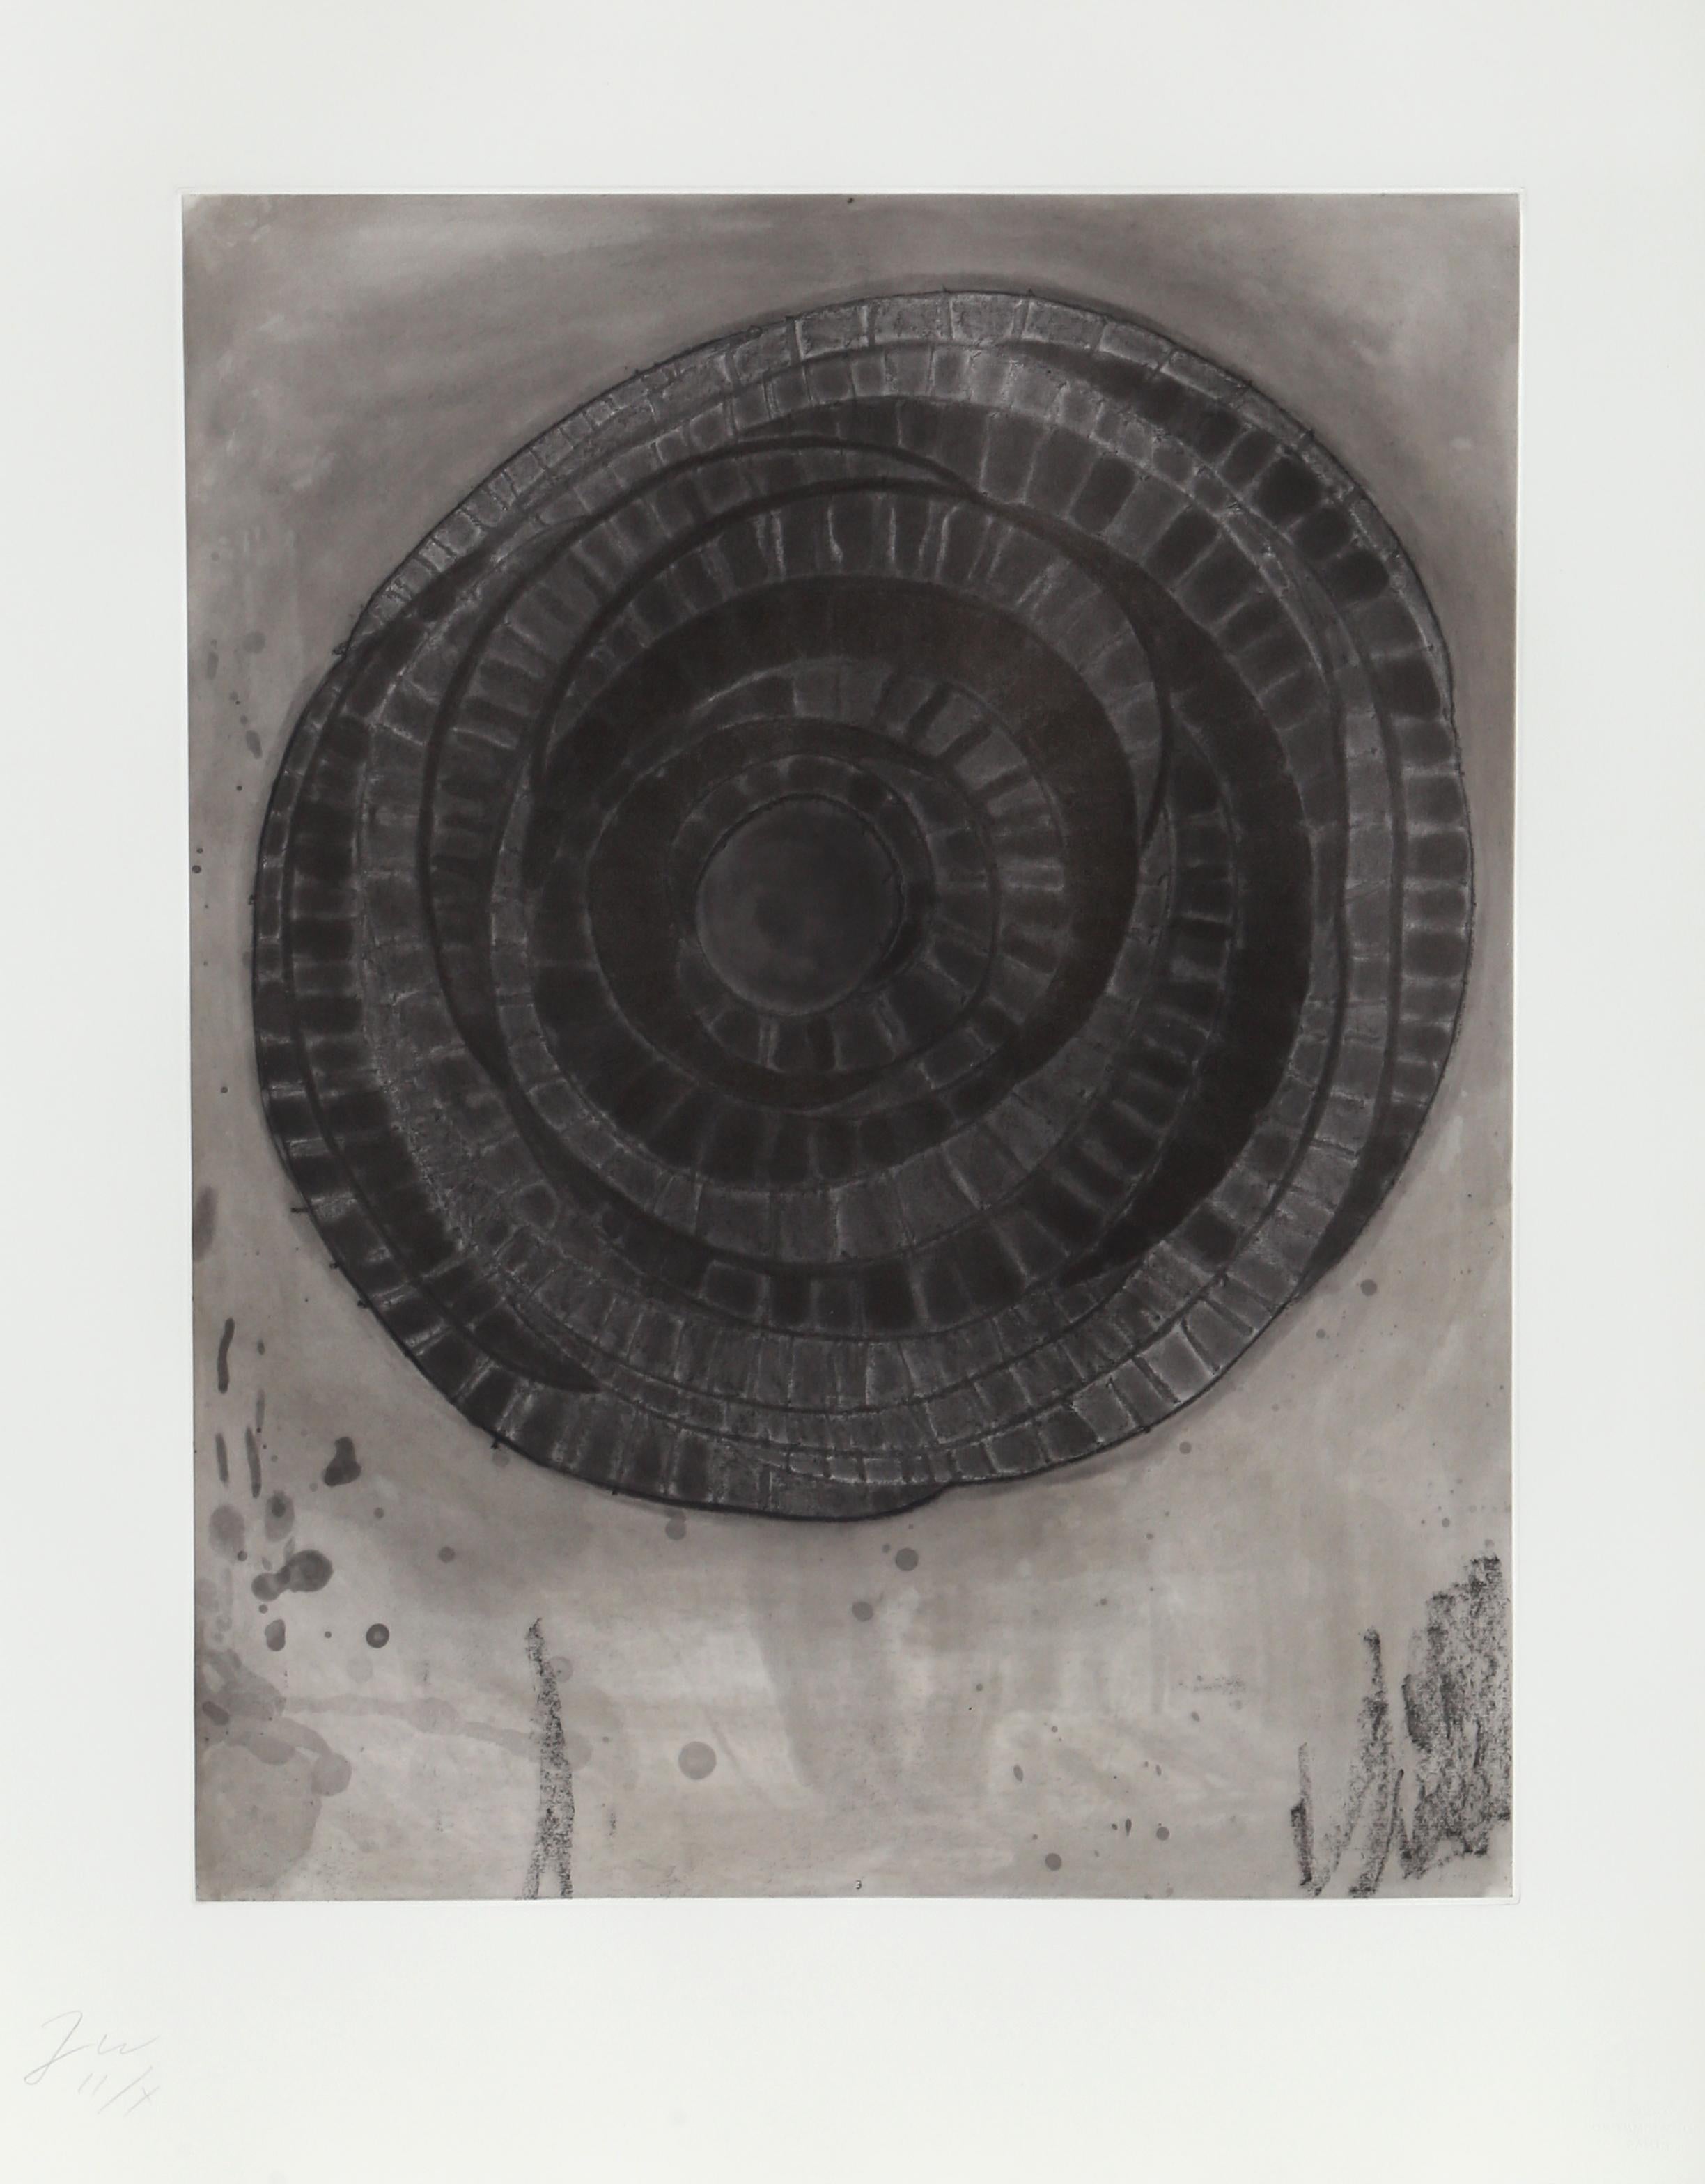 Artist: Terry Winters, American (1949 - )
Title: untitled 1 from Album
Year: 1988
Medium: Etching with Aquatint, signed and numbered in pencil
Edition: HC 2/2
Image: 20 x 16 inches
Size: 26.5  x 21 in. (67.31  x 53.34 cm)